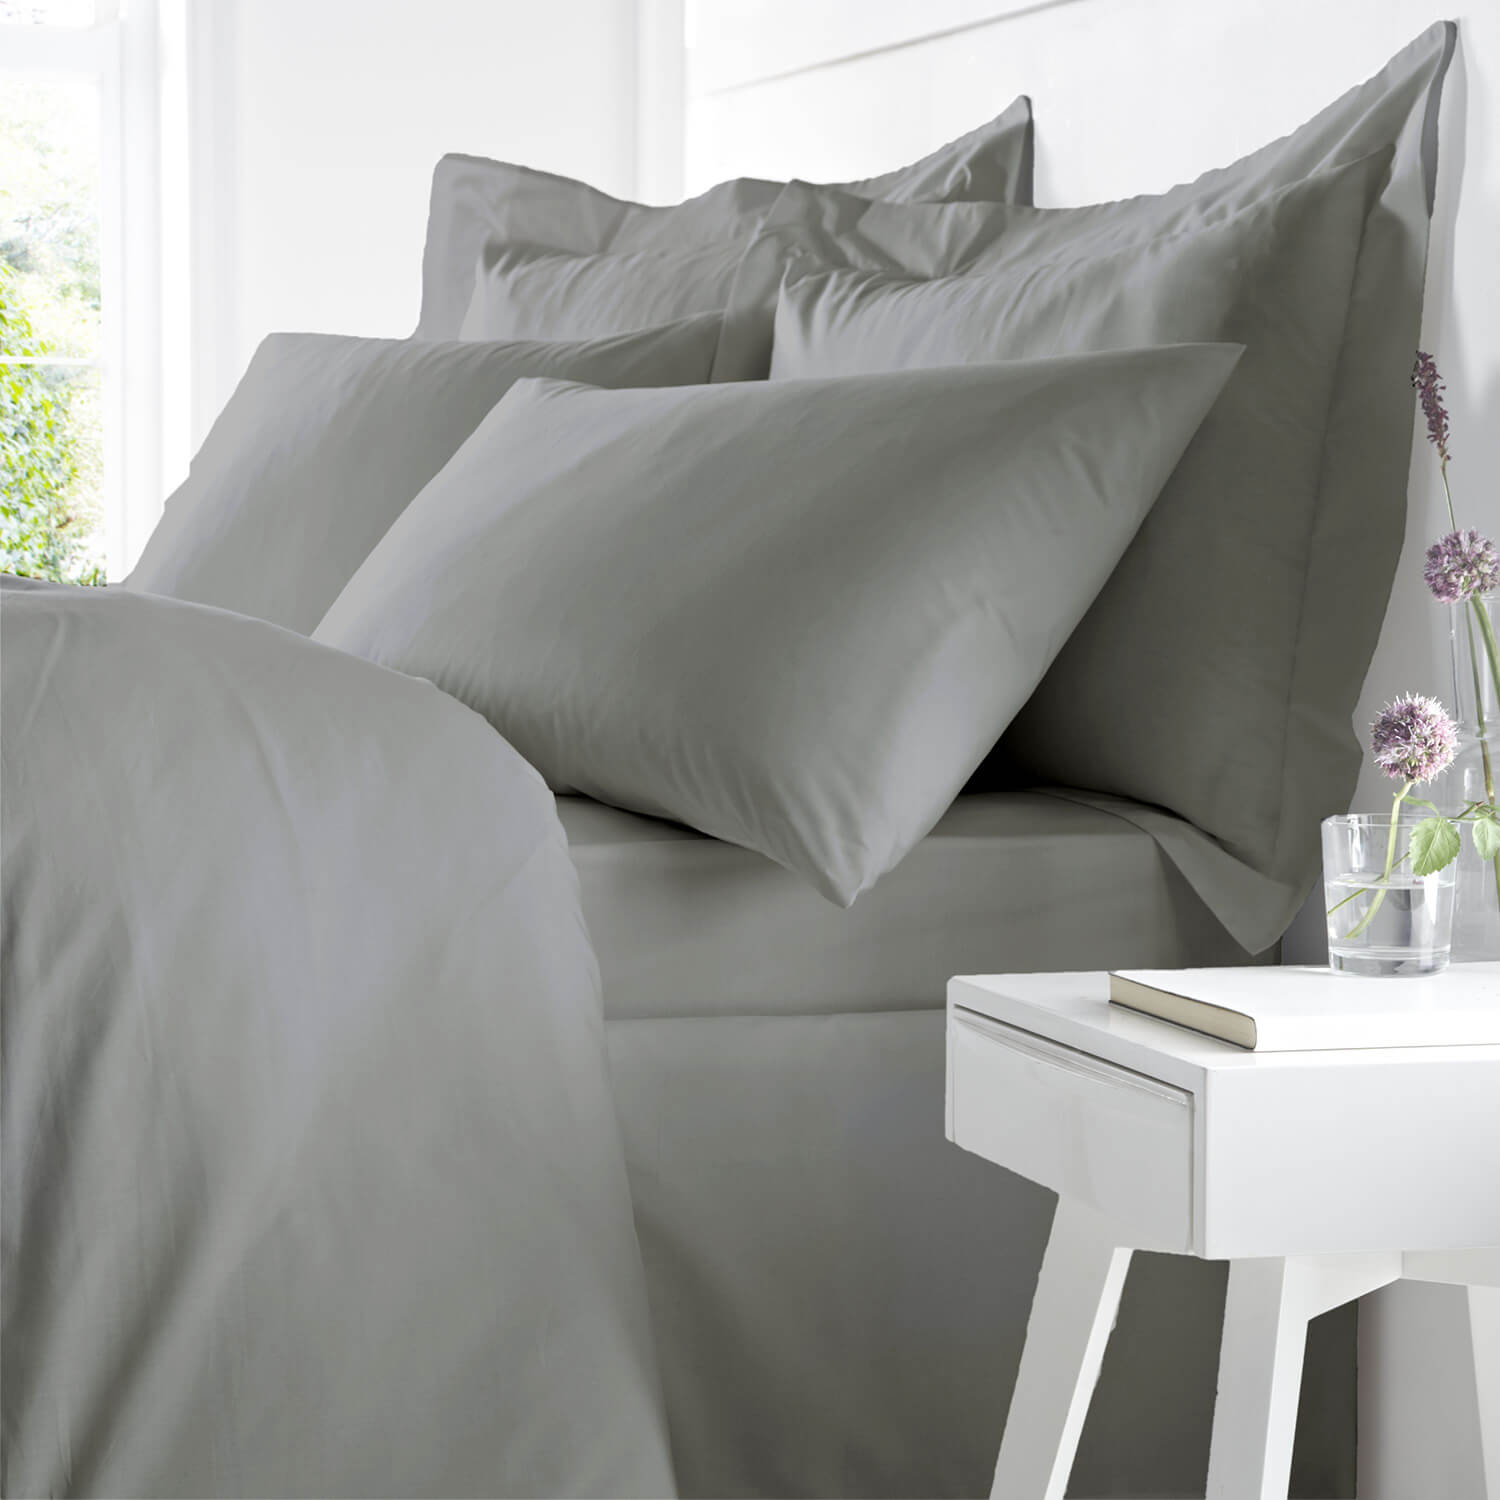 Bianca Fine Linens 100% Cotton Egyptian Cotton Fitted Sheet - Charcoal 2 Shaws Department Stores